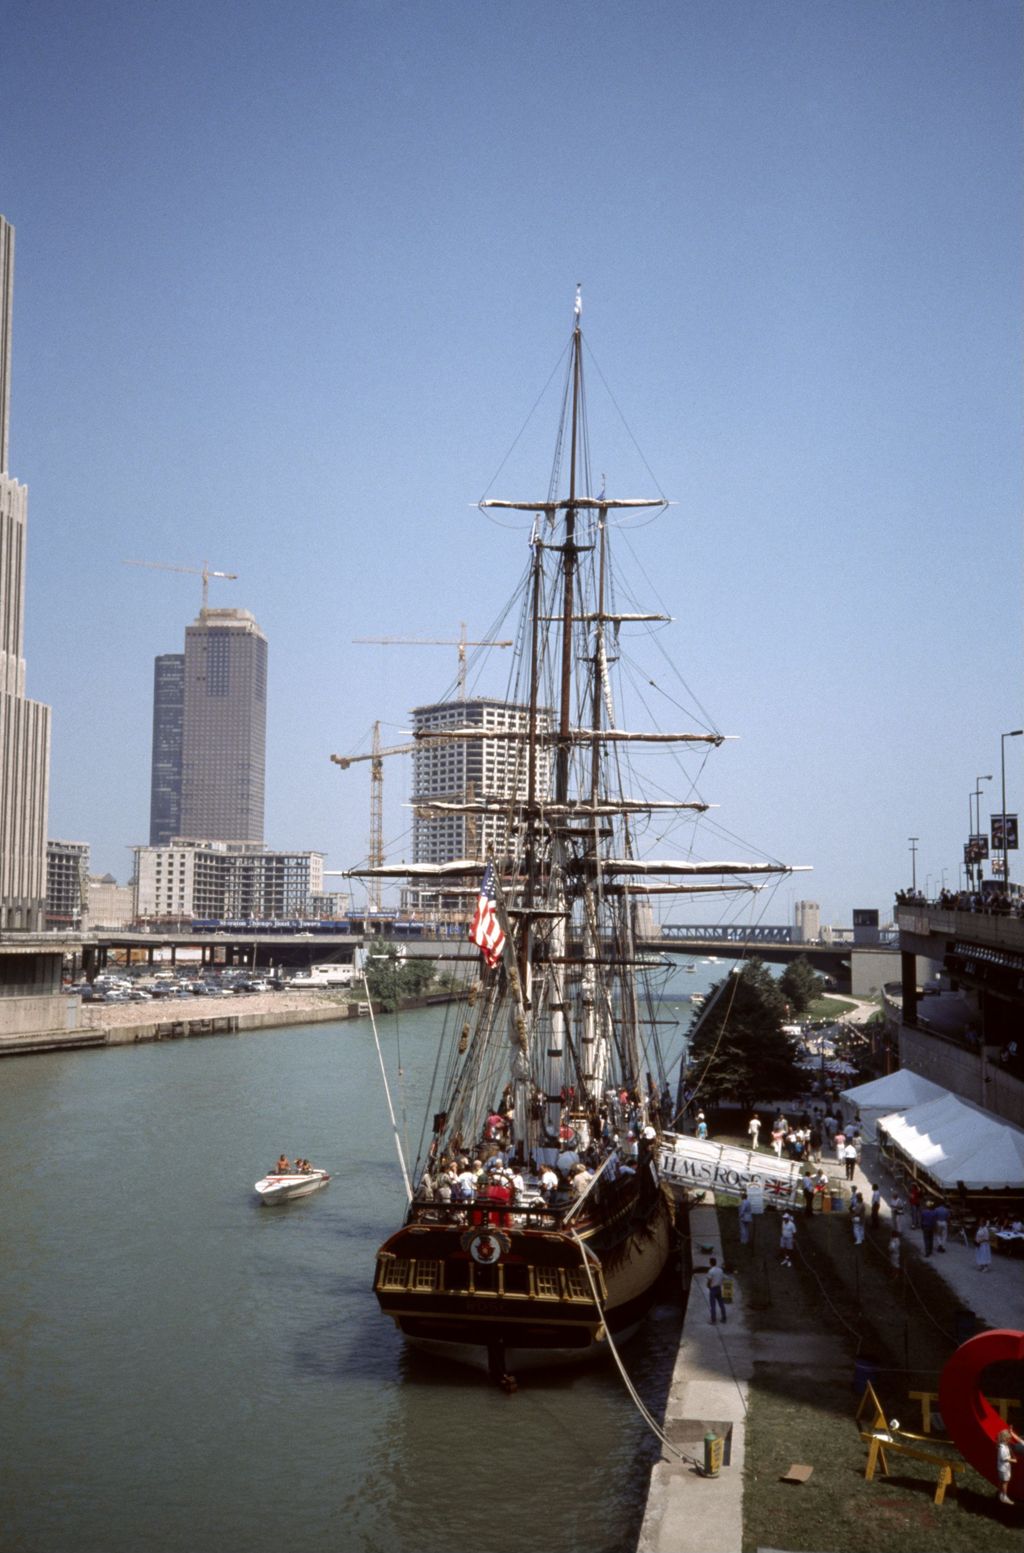 Miniature of HMS Rose moored on the Chicago River